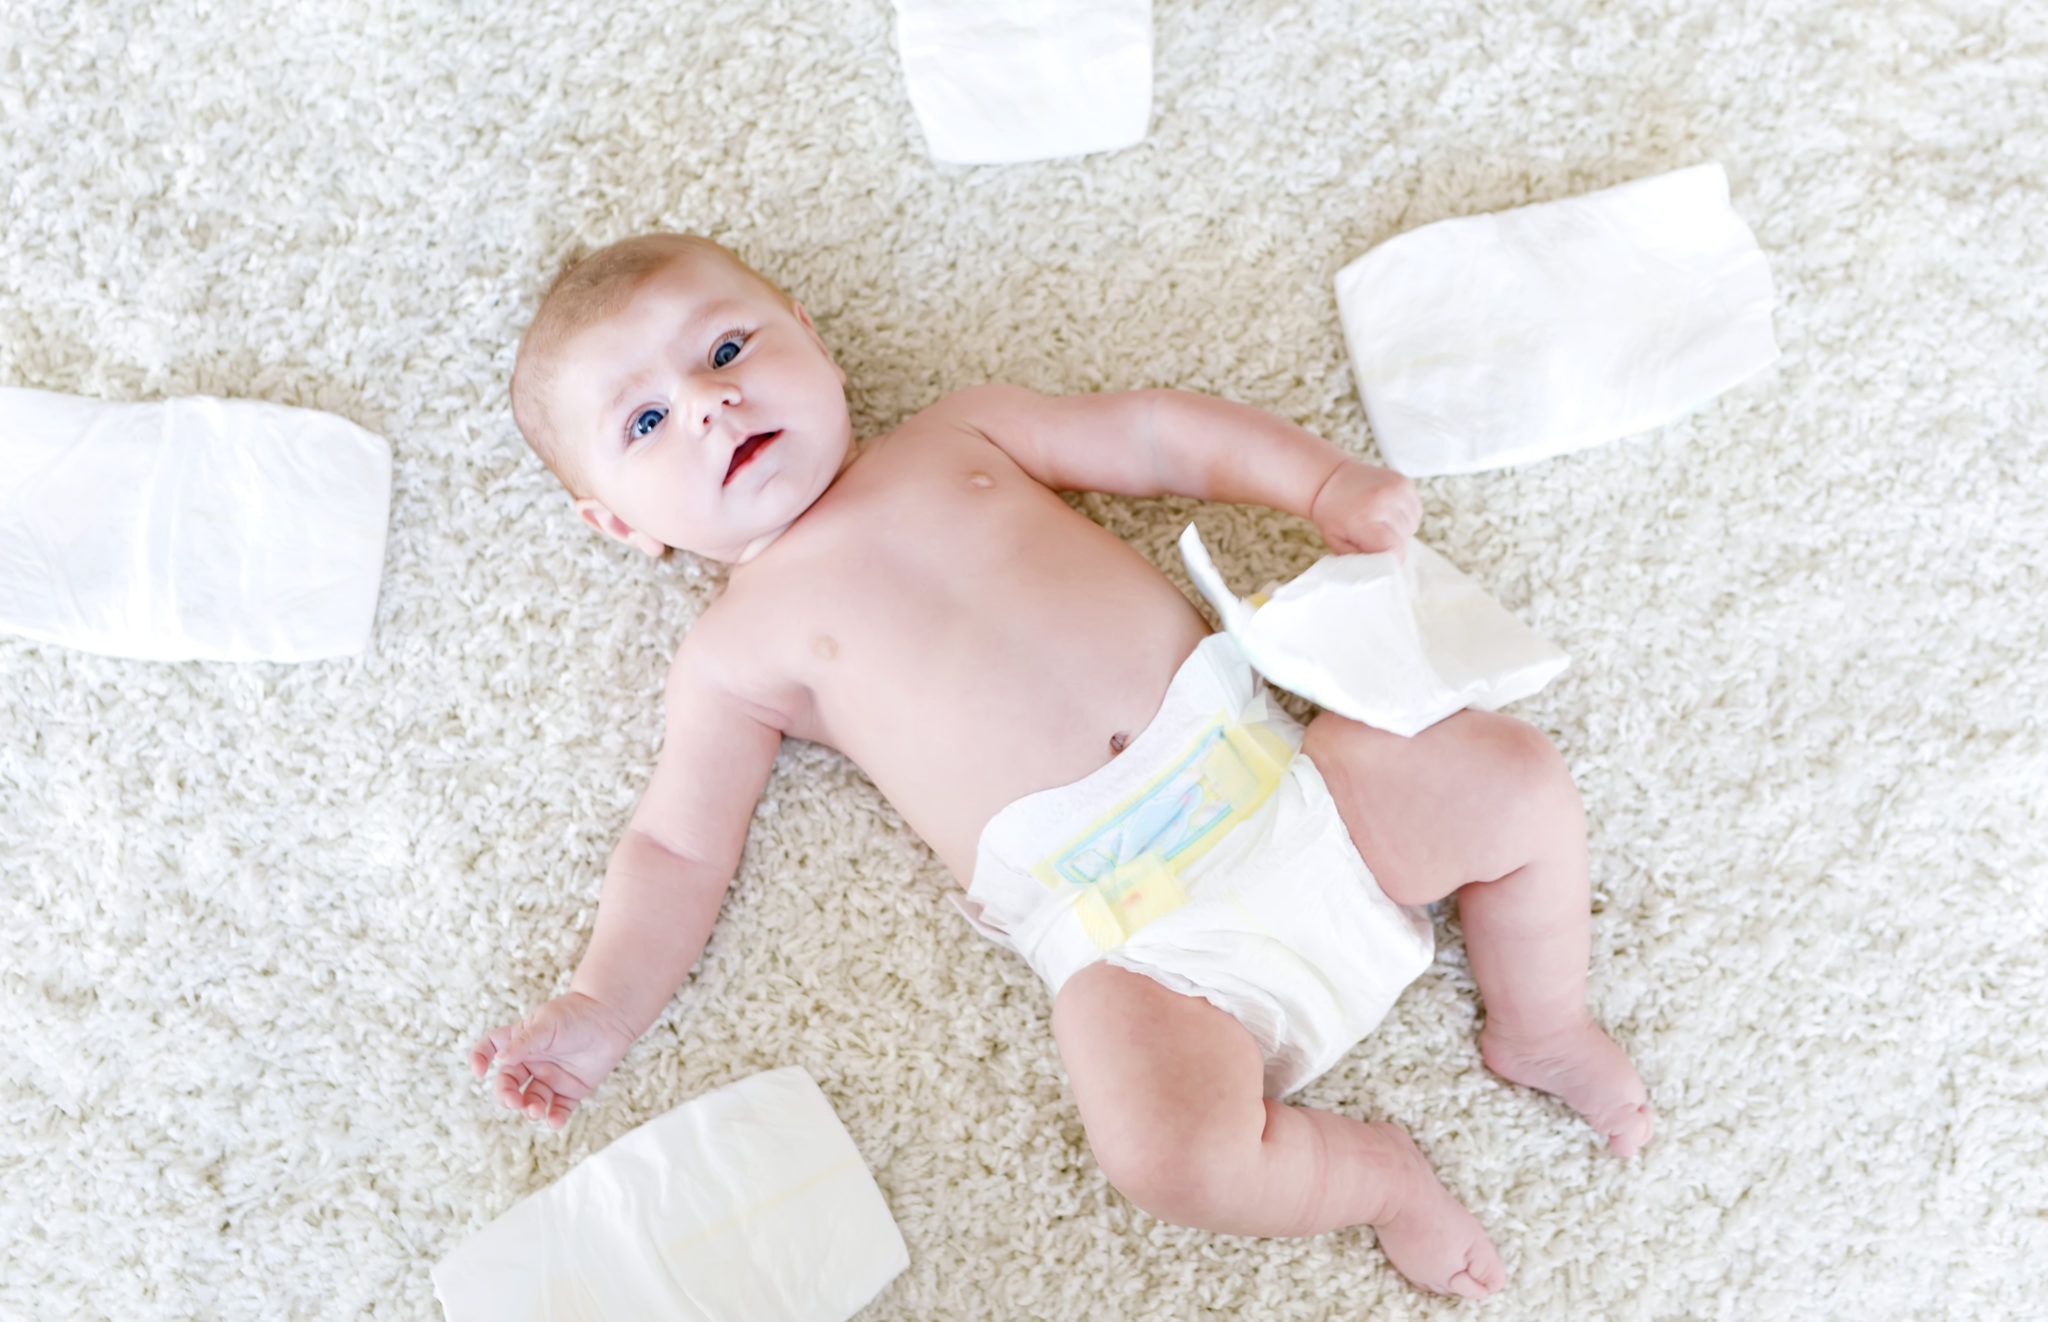 baby surrounded by diapers